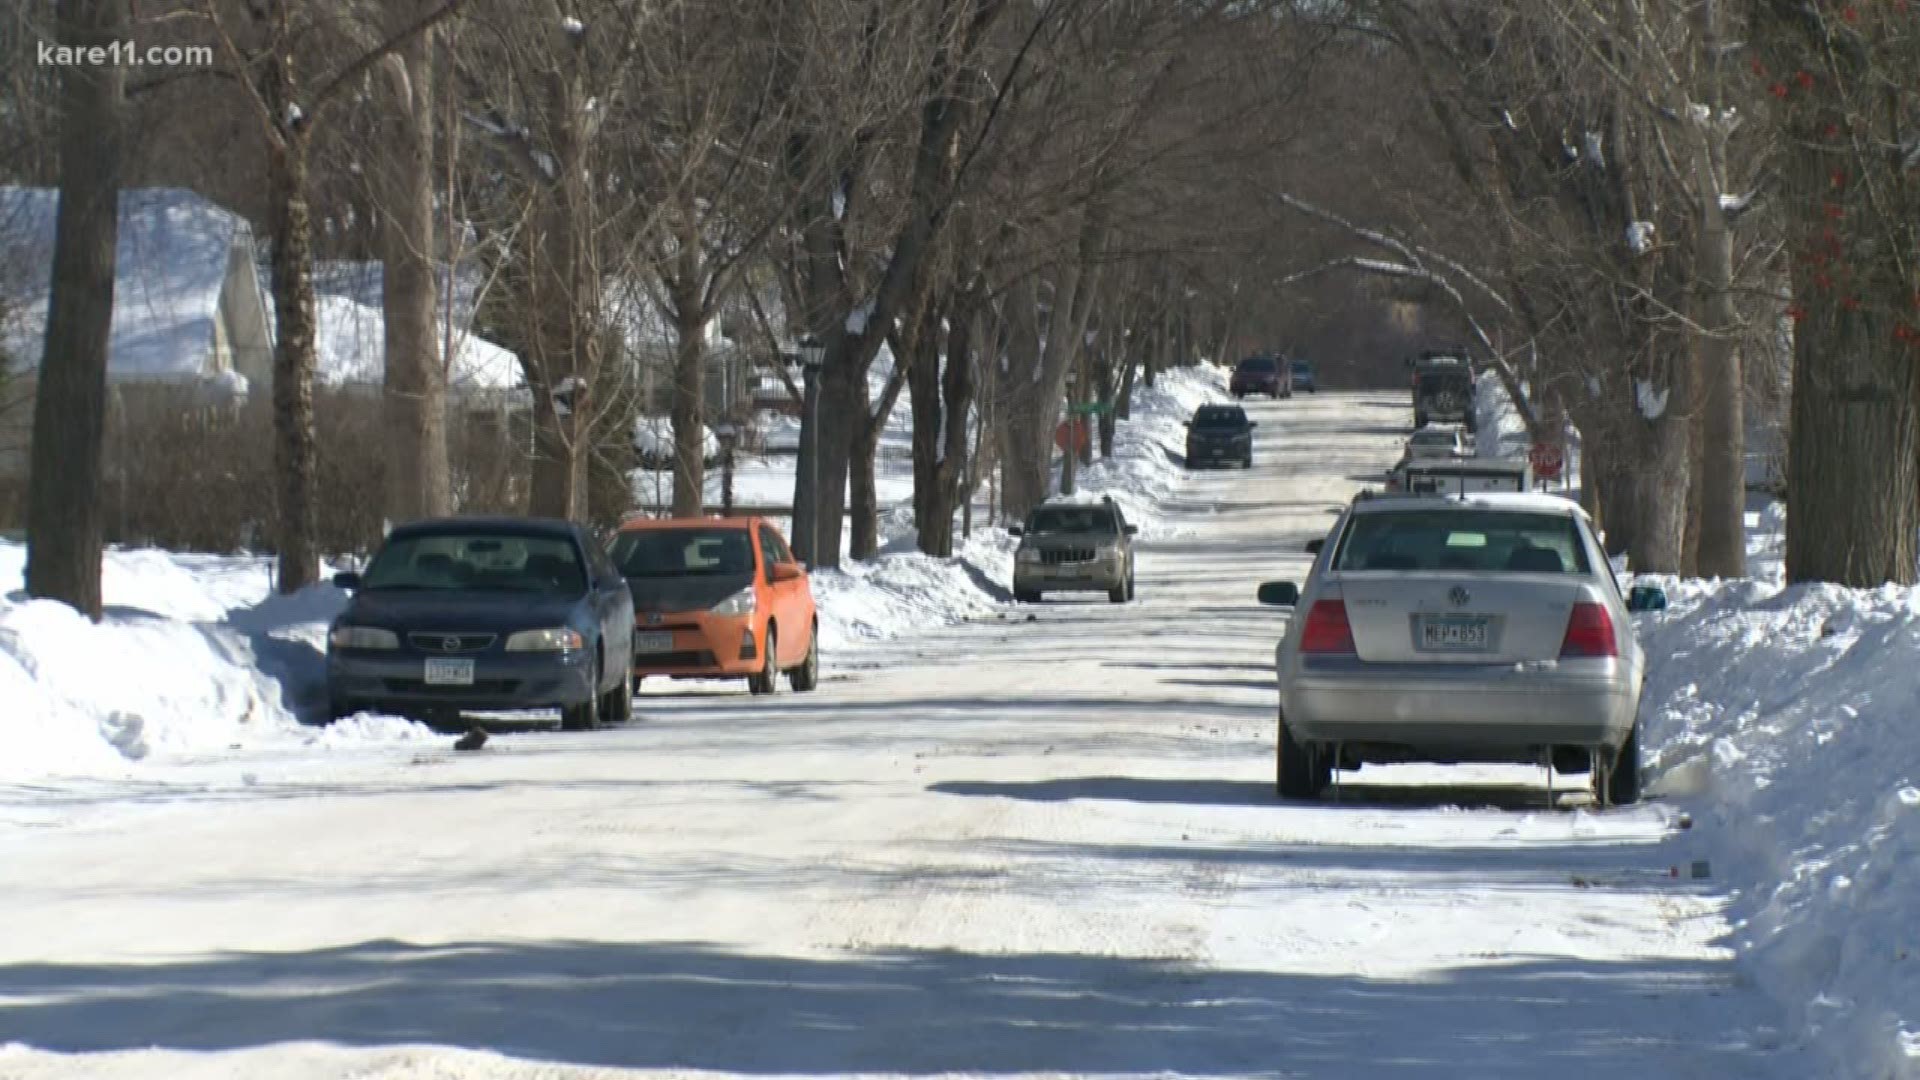 All that snow is causing serious trouble for some residents in Saint Paul saying they're getting trapped and the city is slow to remove the snow.
   Heidi Wigdahl went to find out what's happening and how the city is handling it.